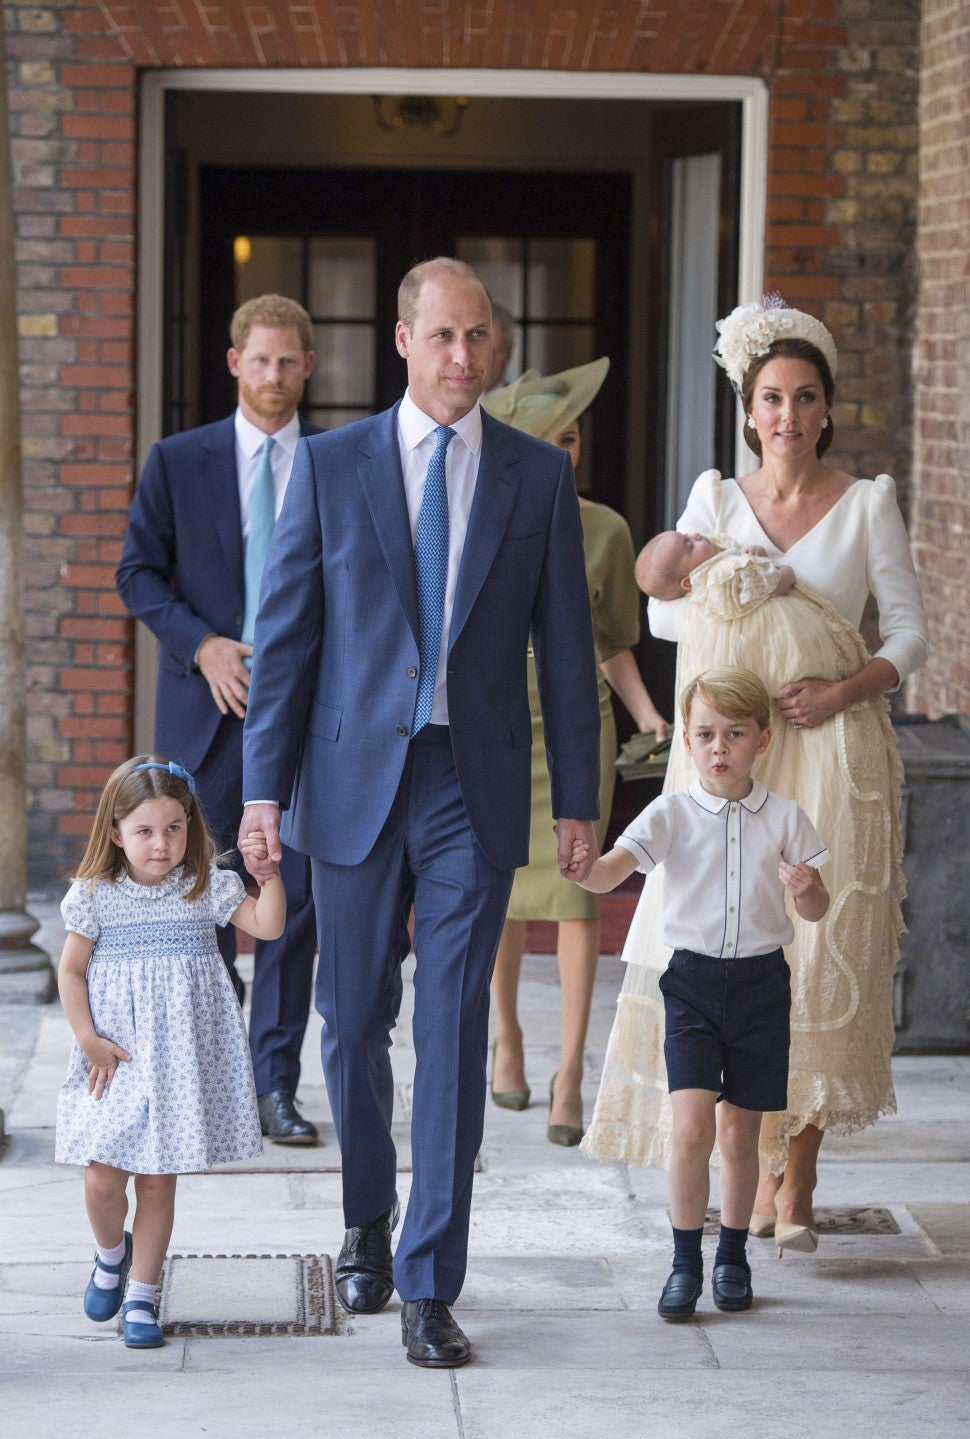 Princess Charlotte and Prince George hold the hands of their father, the Duke of Cambridge, as they arrive at the Chapel Royal, St James's Palace, London for the christening of their brother, Prince Louis.